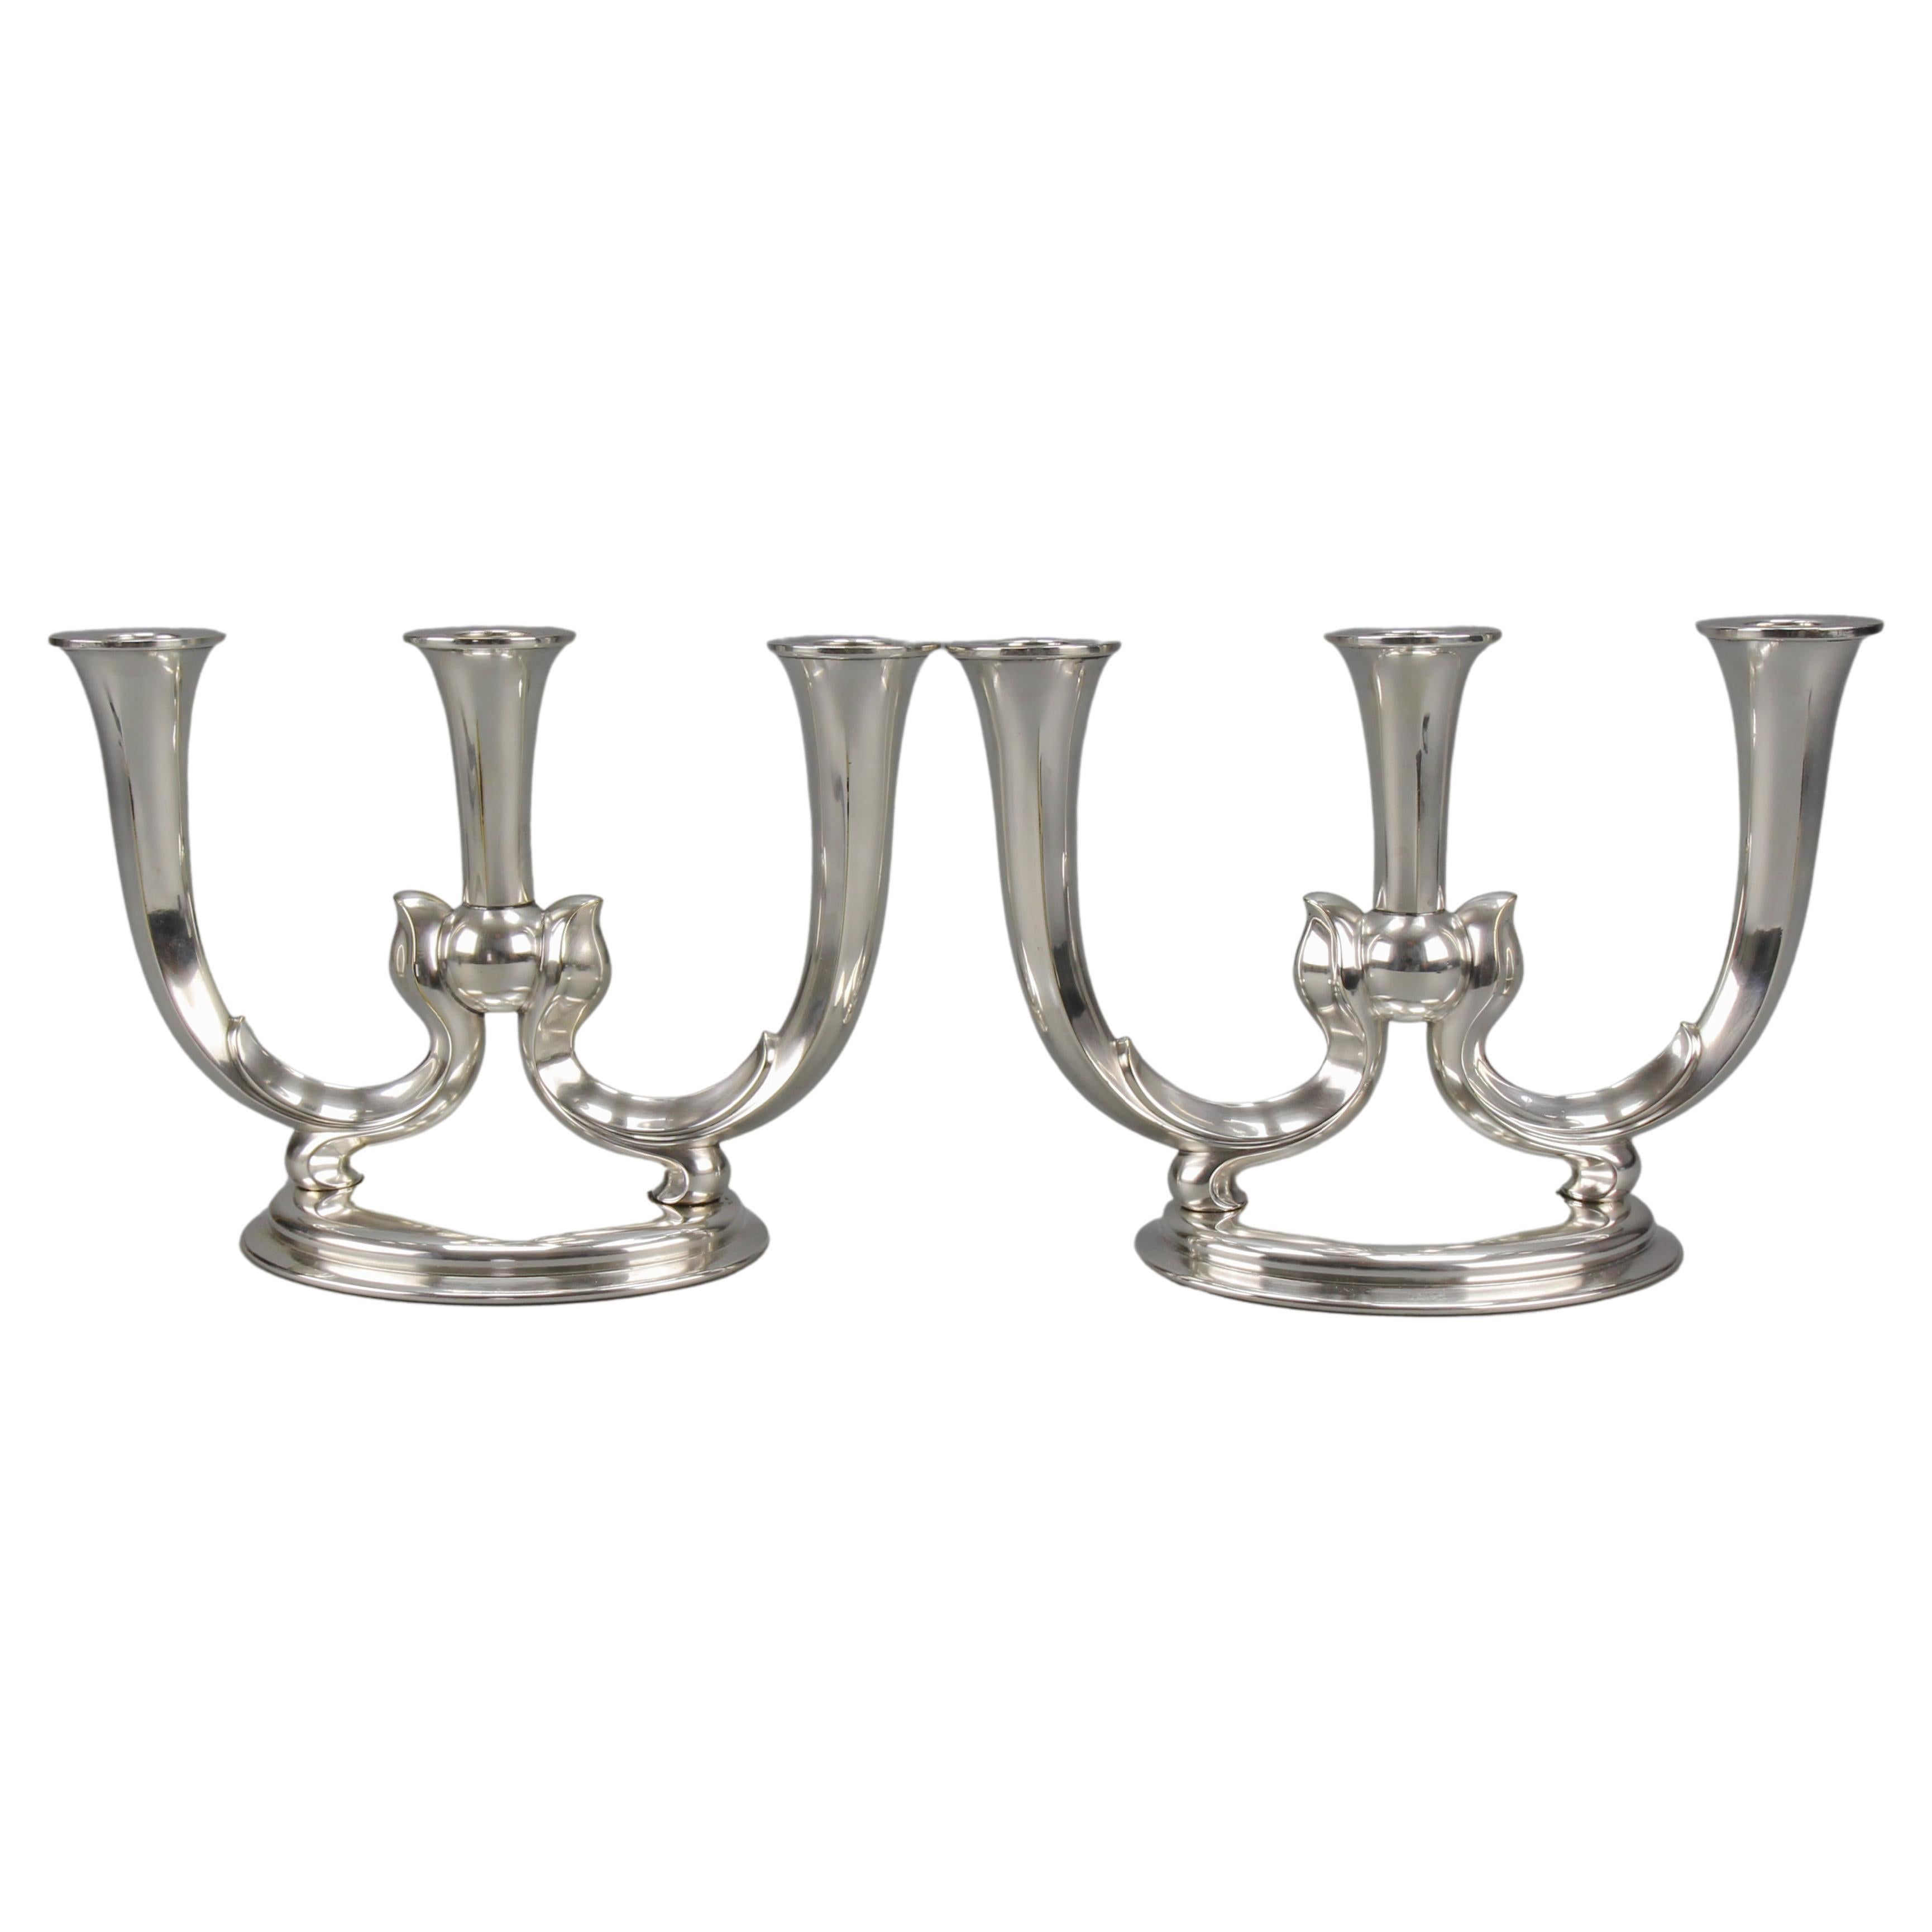 Pair of German WMF Art Deco Three-Arm Candle Holders For Sale